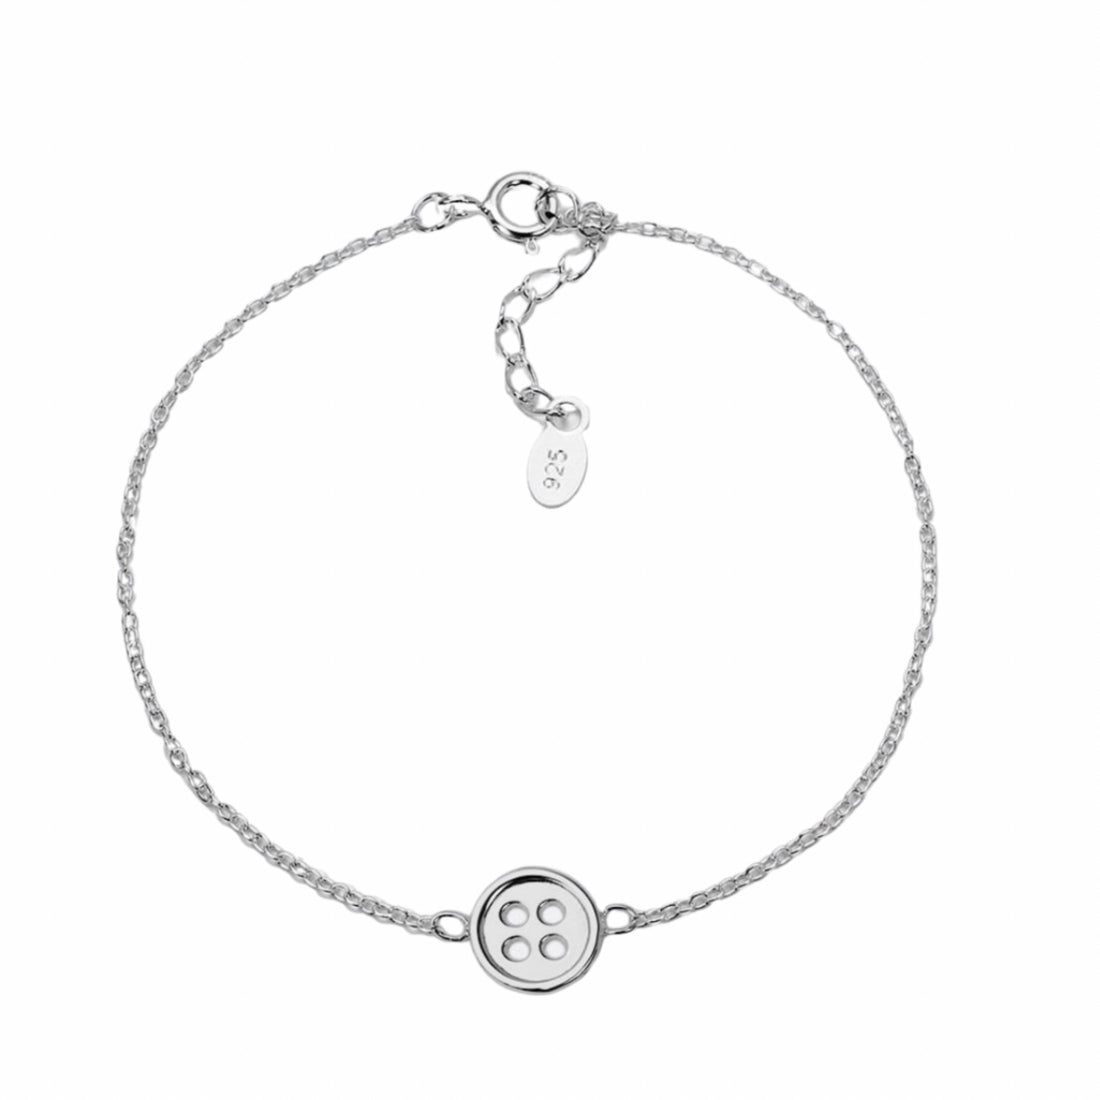 Silver bracelet with button charm and ajustable fastener.